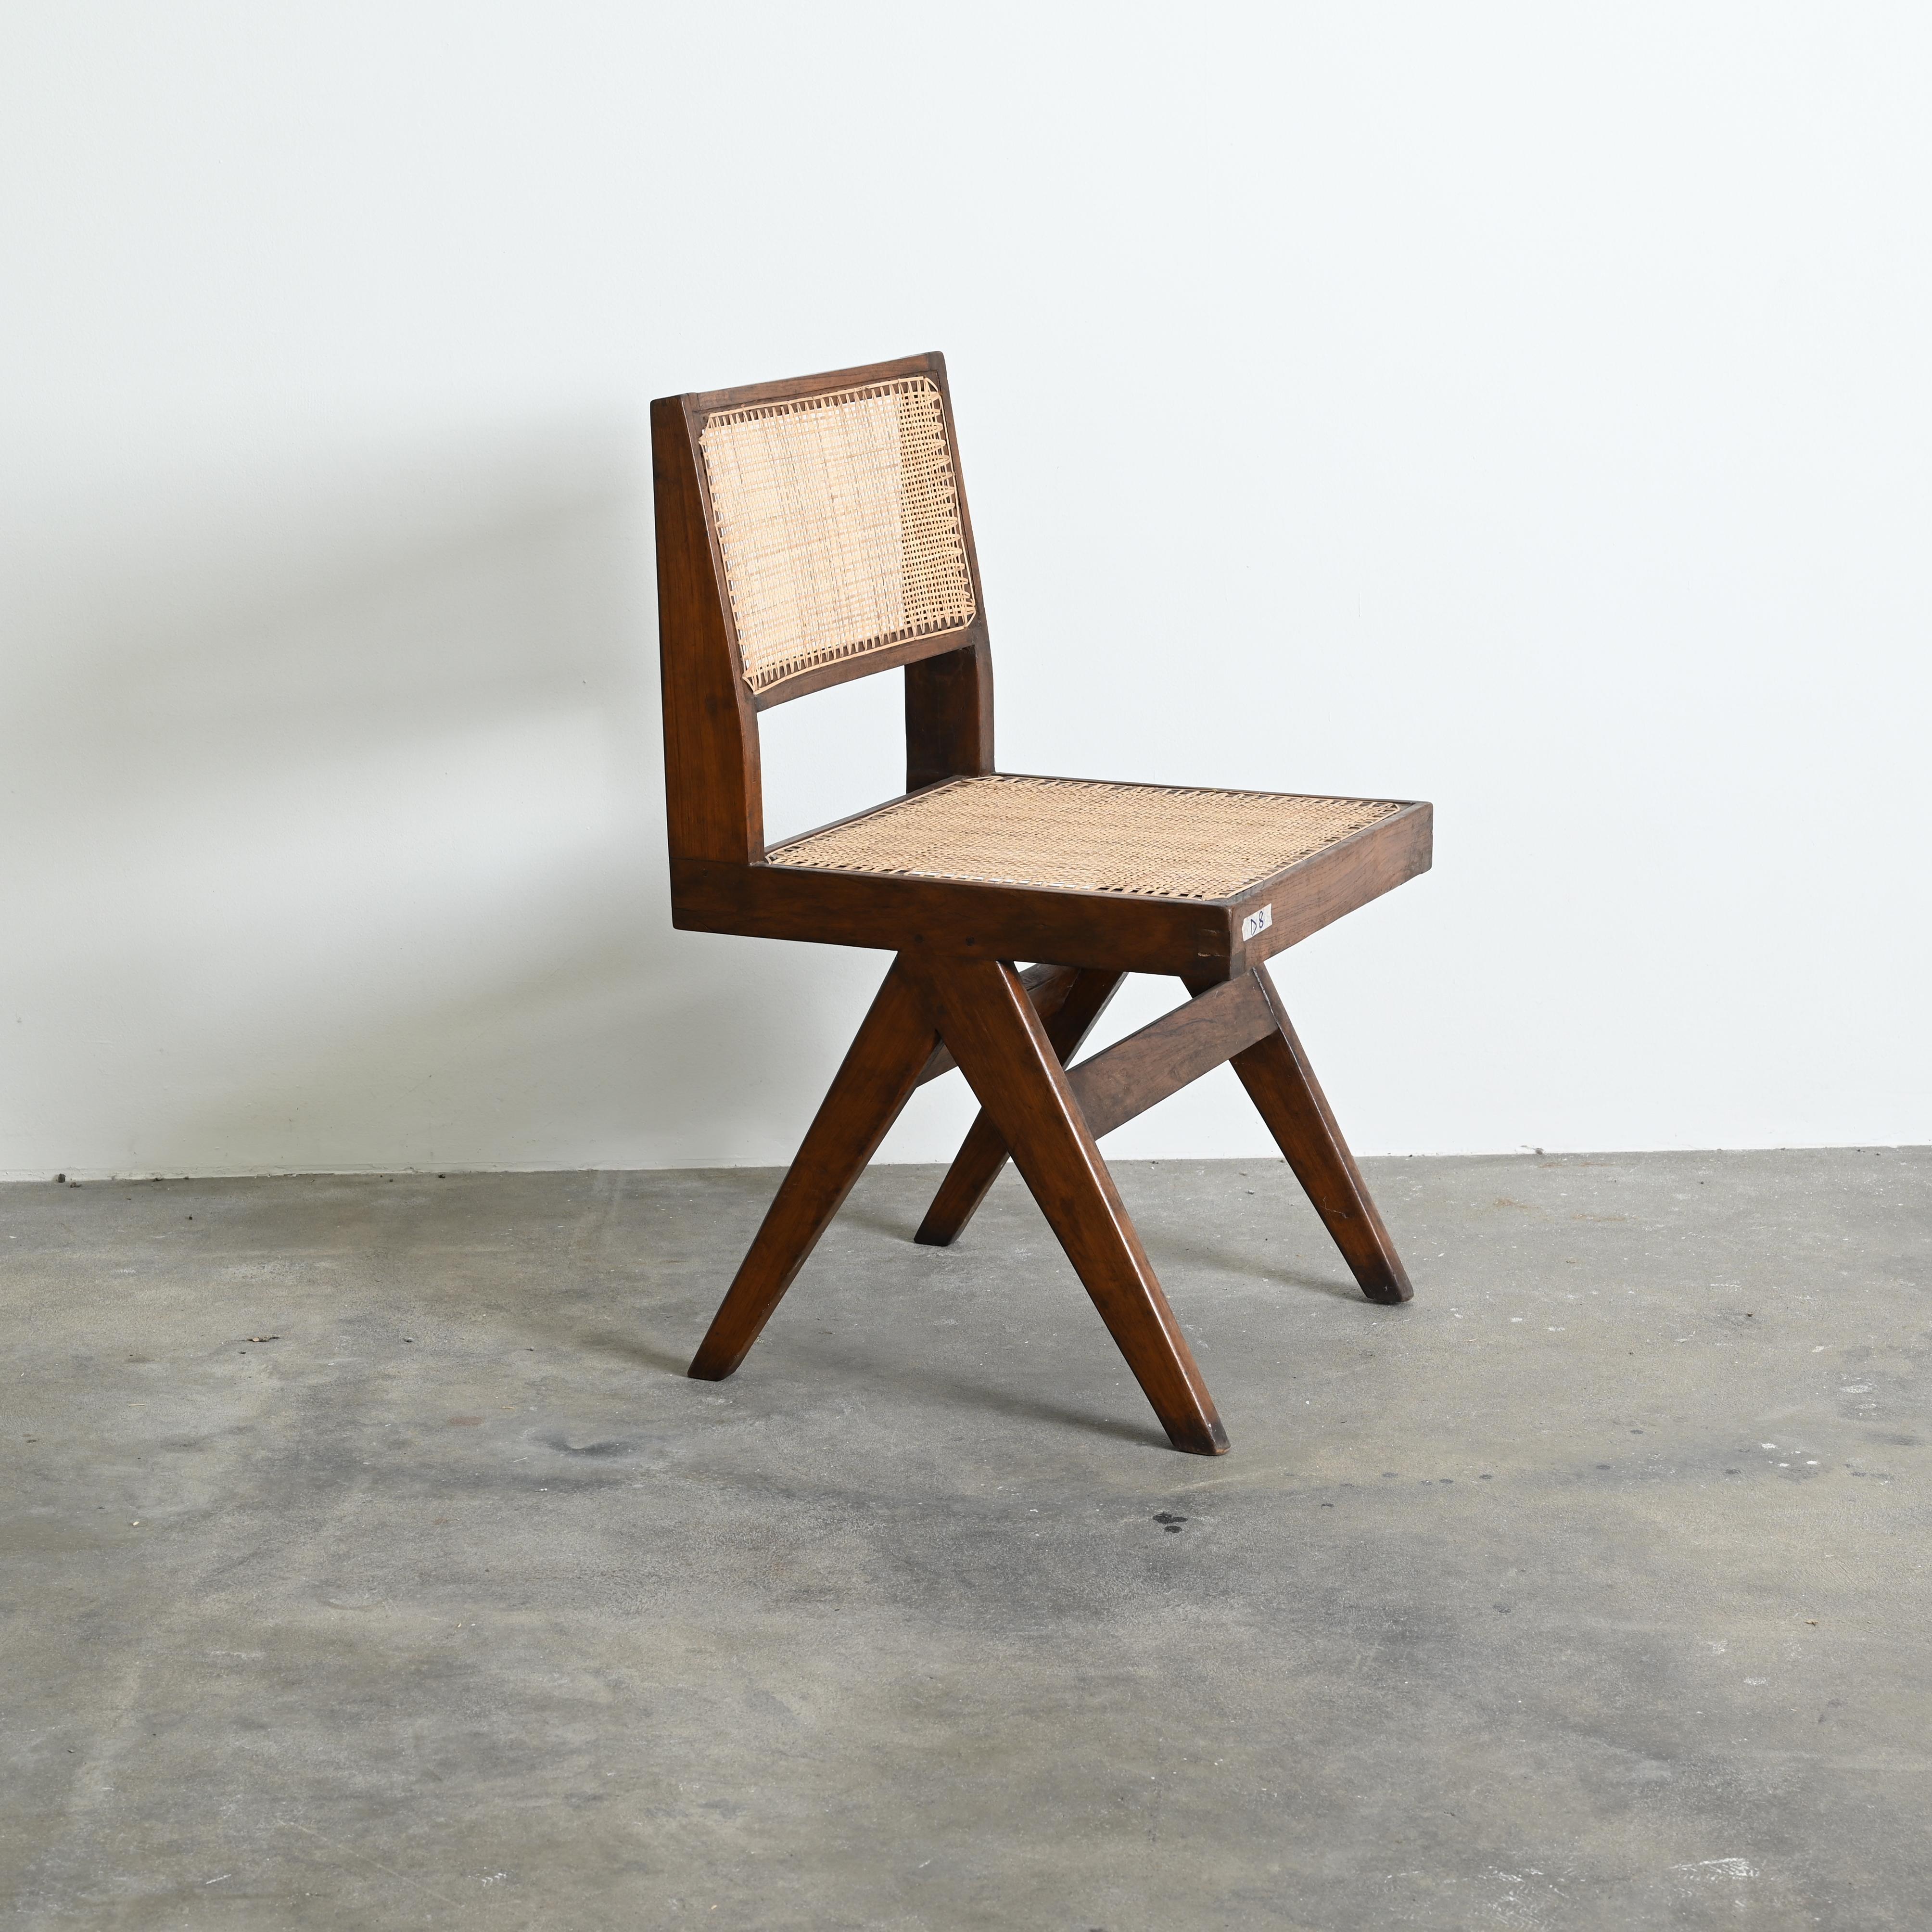 This chair is a fantastic piece; finally it's iconic. It appears so simple and yet so precise, where proportions seems to be perfect. This A-shaped legs are typical for Chandigarh objects. Then this L-shaped seat, where the beams get at the ends